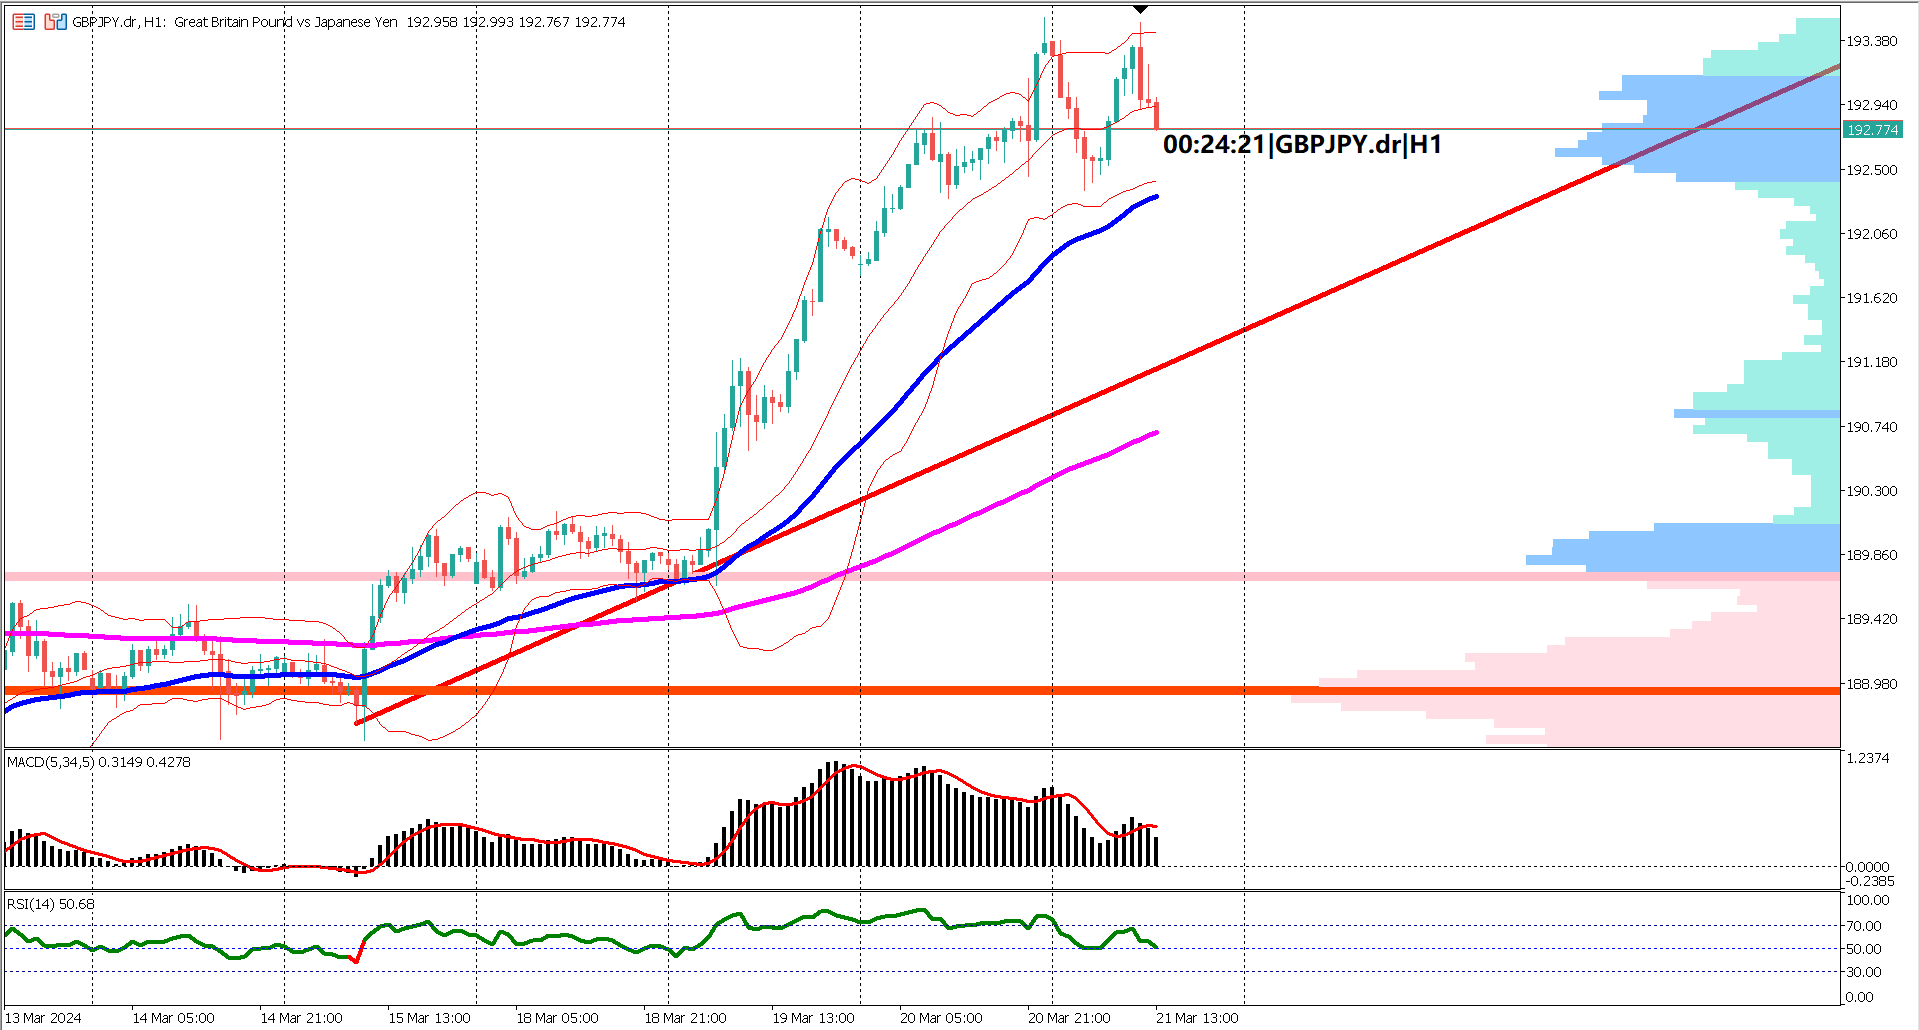 GBPJPY Bulls Pause Ahead of BoE Rate Decision